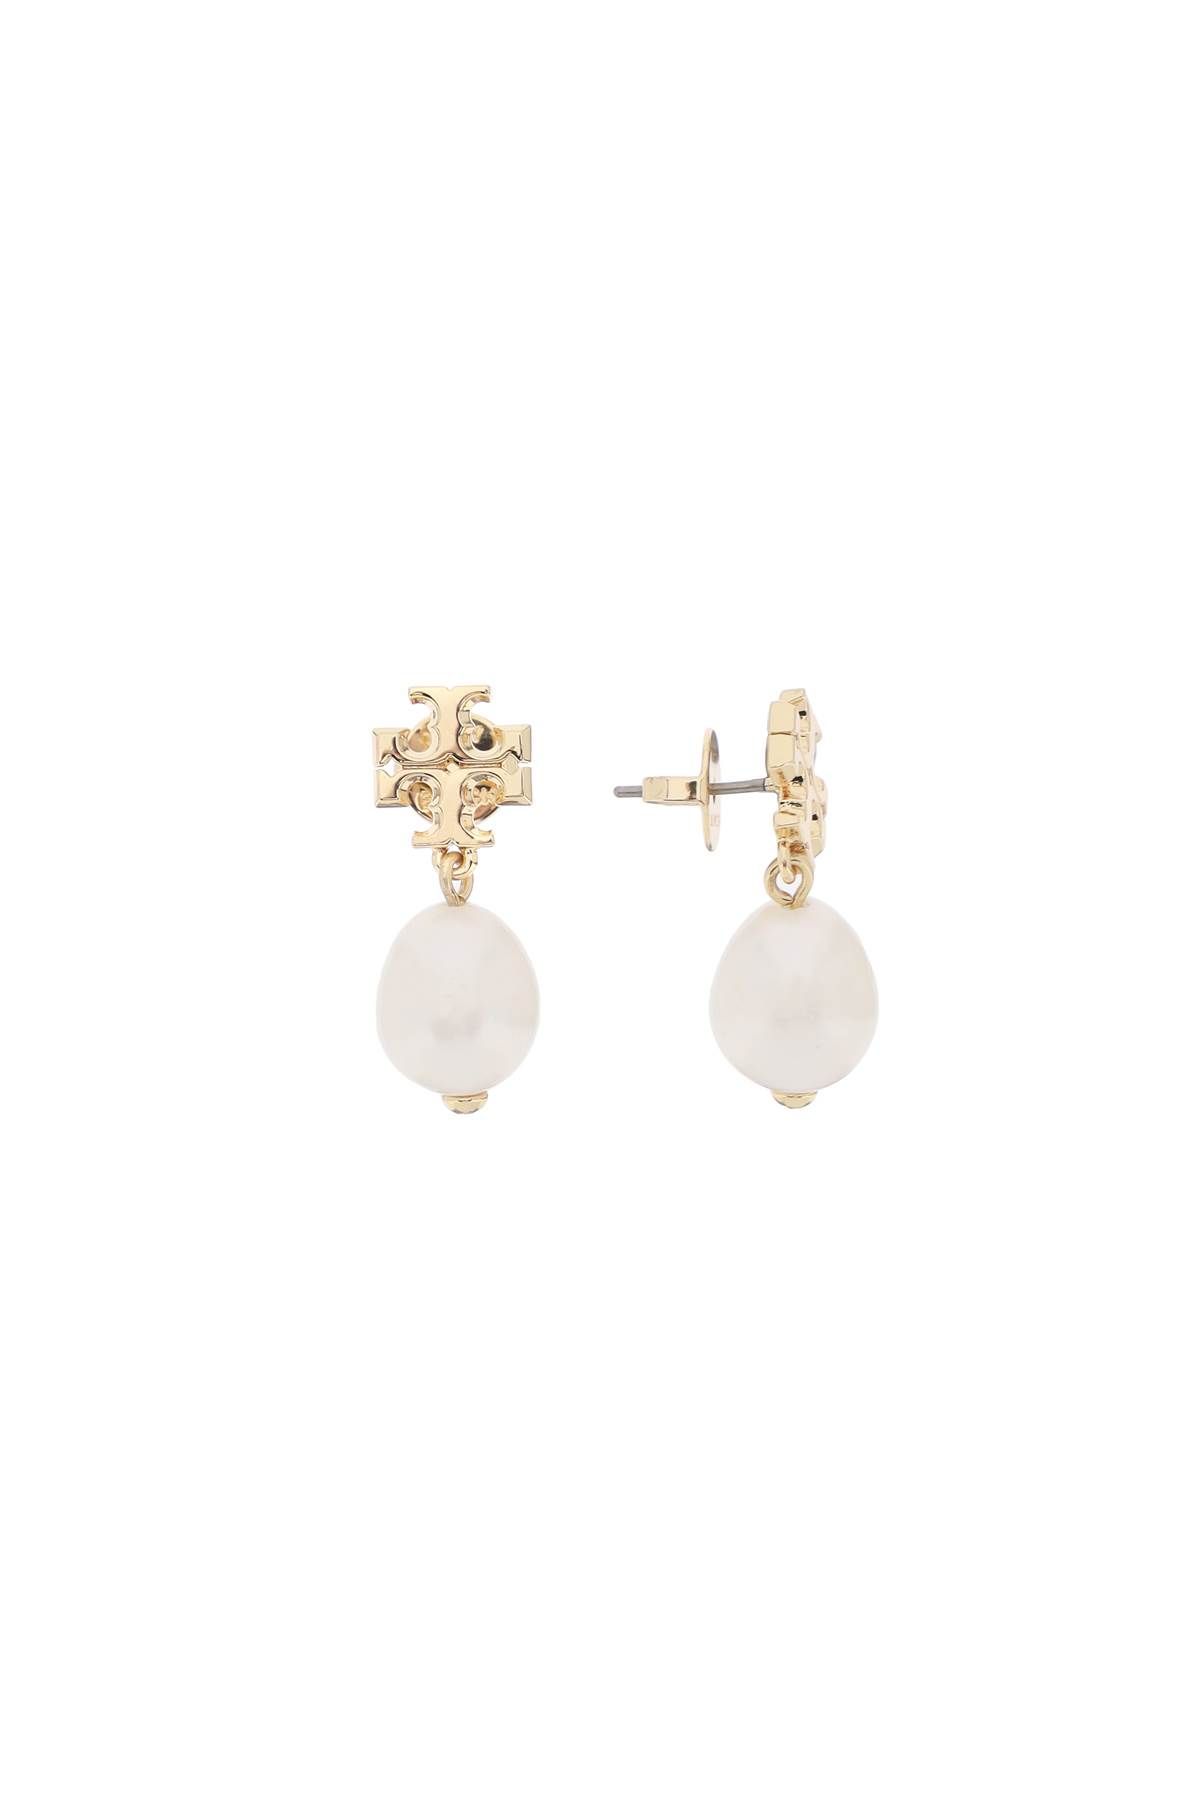 Tory Burch Kira Earring With Pearl In White,gold